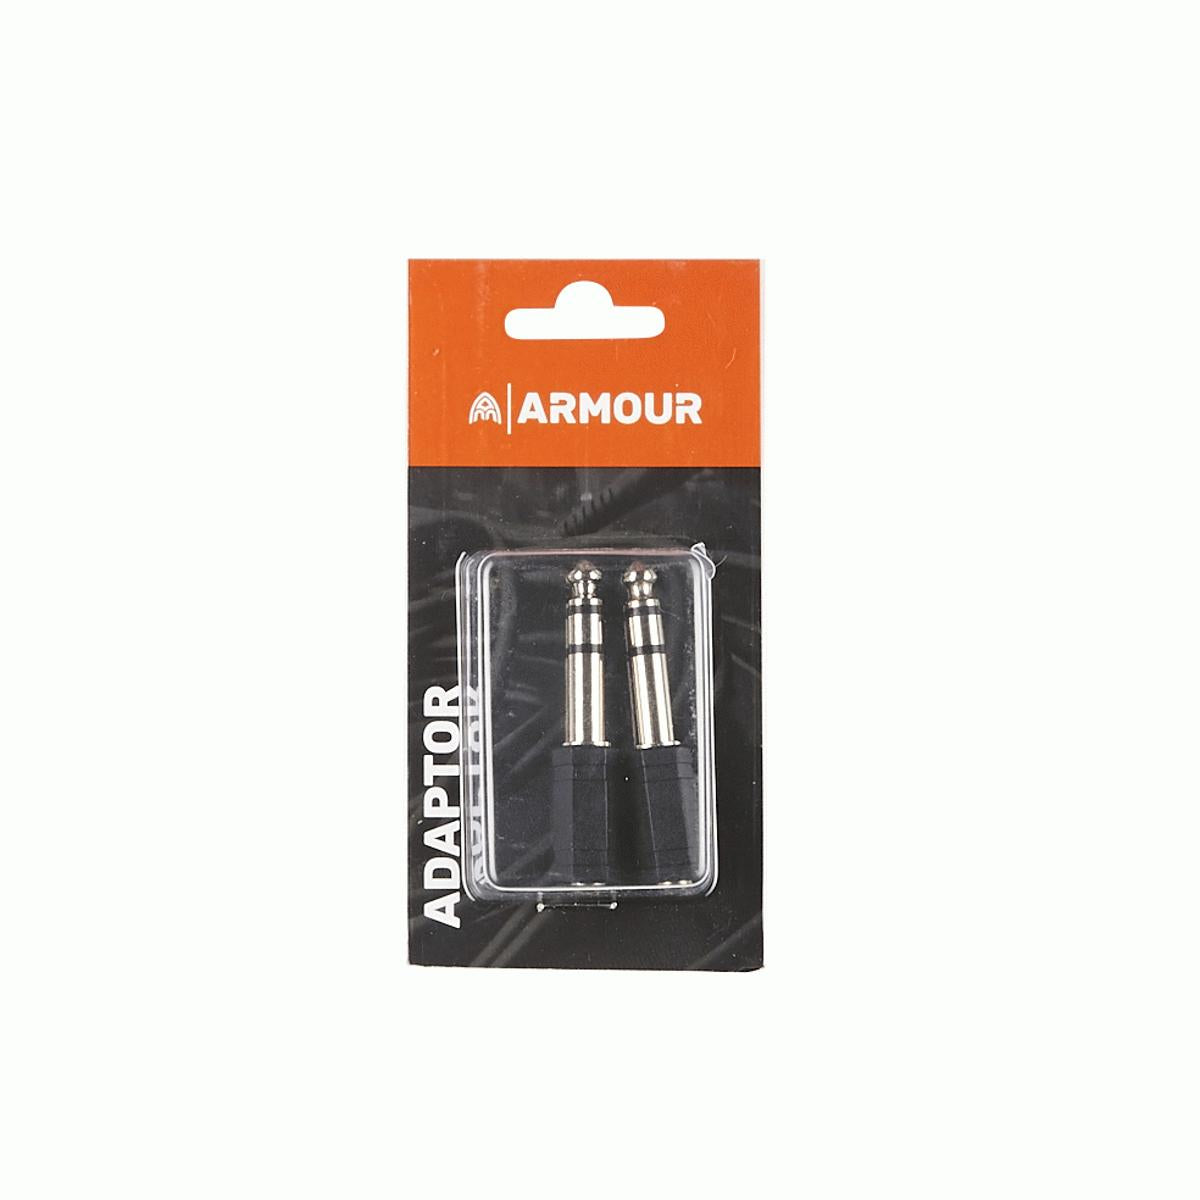 Armour ADAP2 3.5mm Female to 6.5mm Male Stereo Adaptor - 2 Pieces